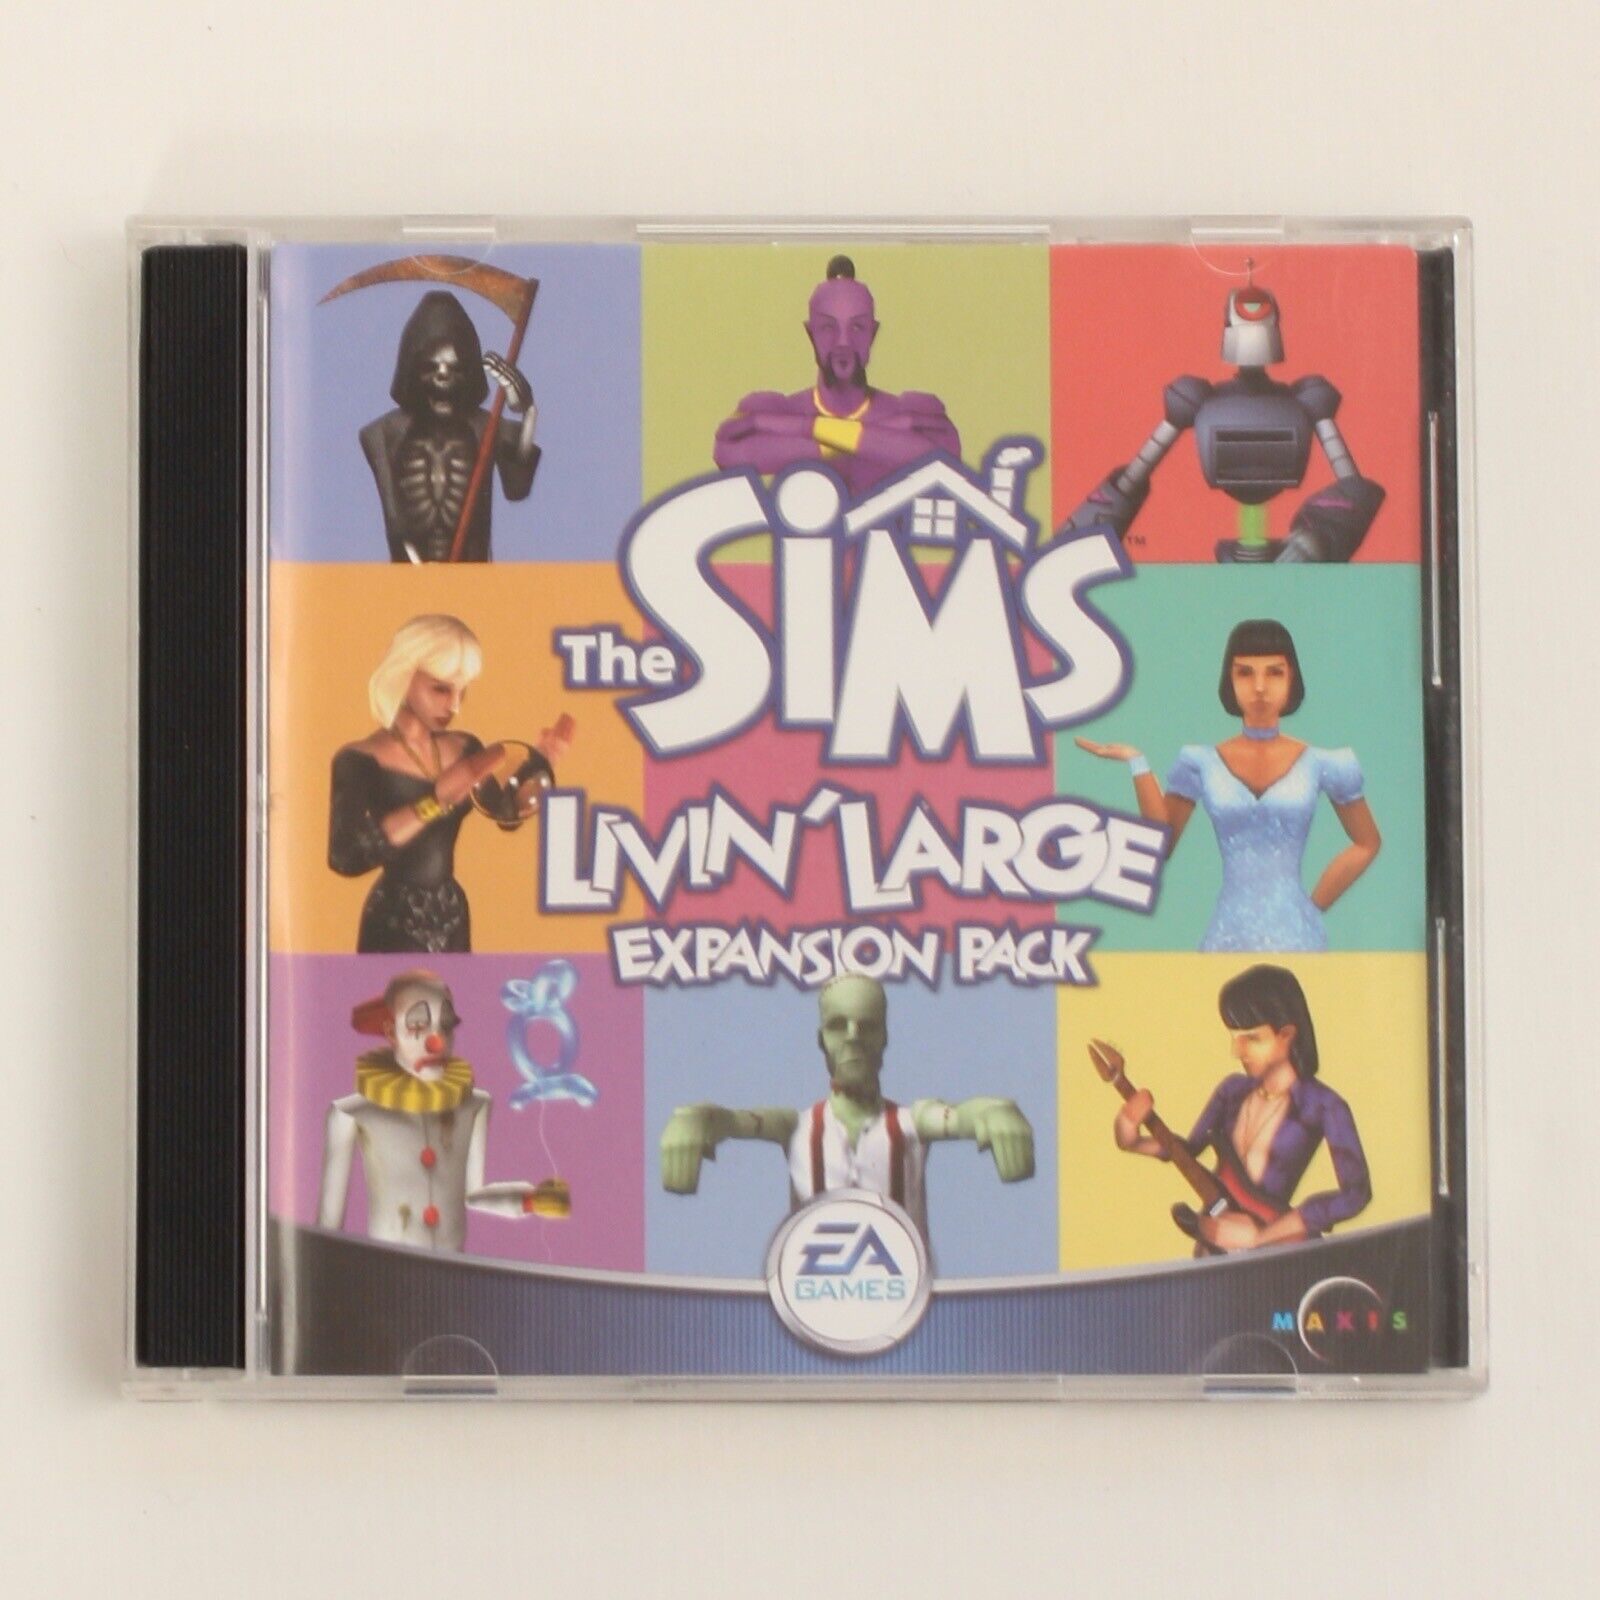 The Sims Livin’ Large Expansion Pack (Vintage PC Game)